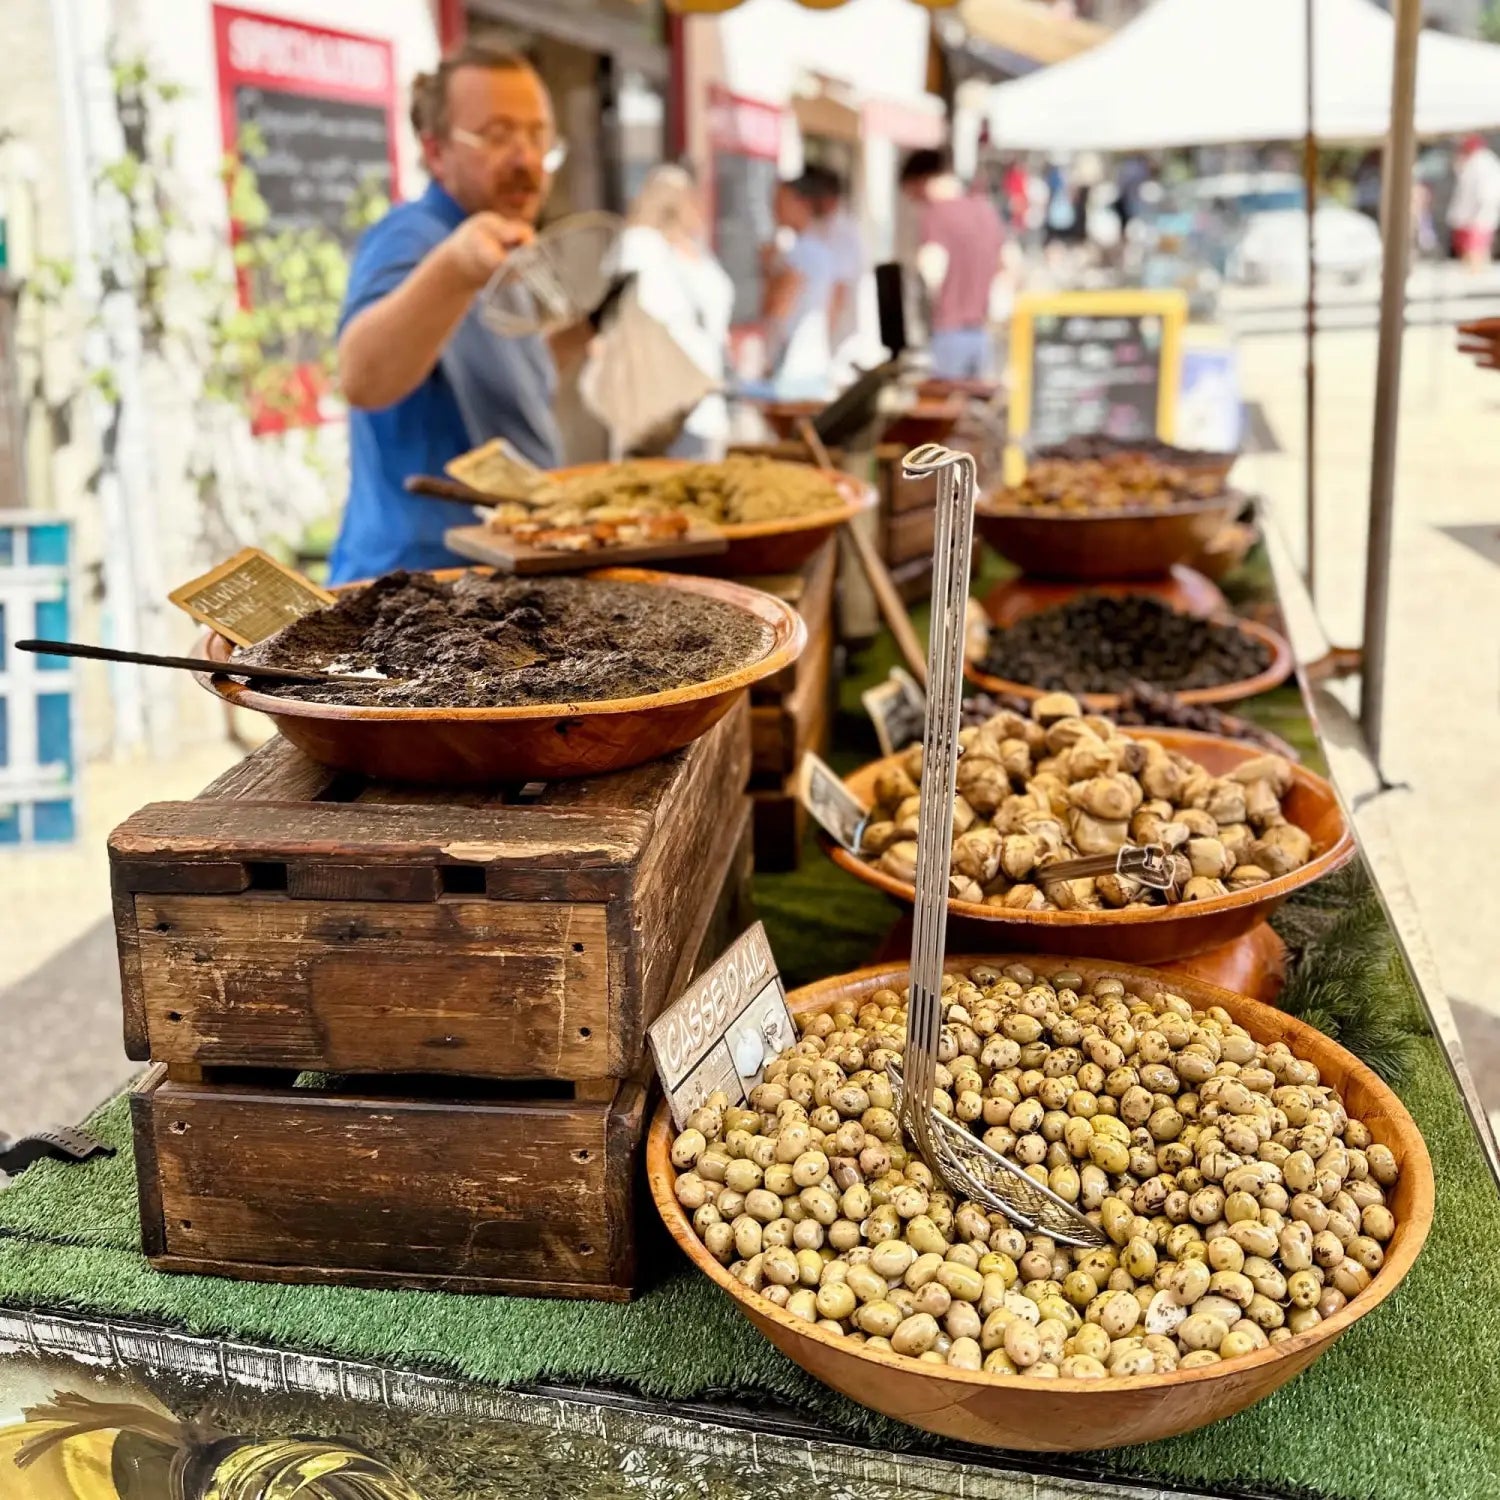 The olive stall at the market in Sault